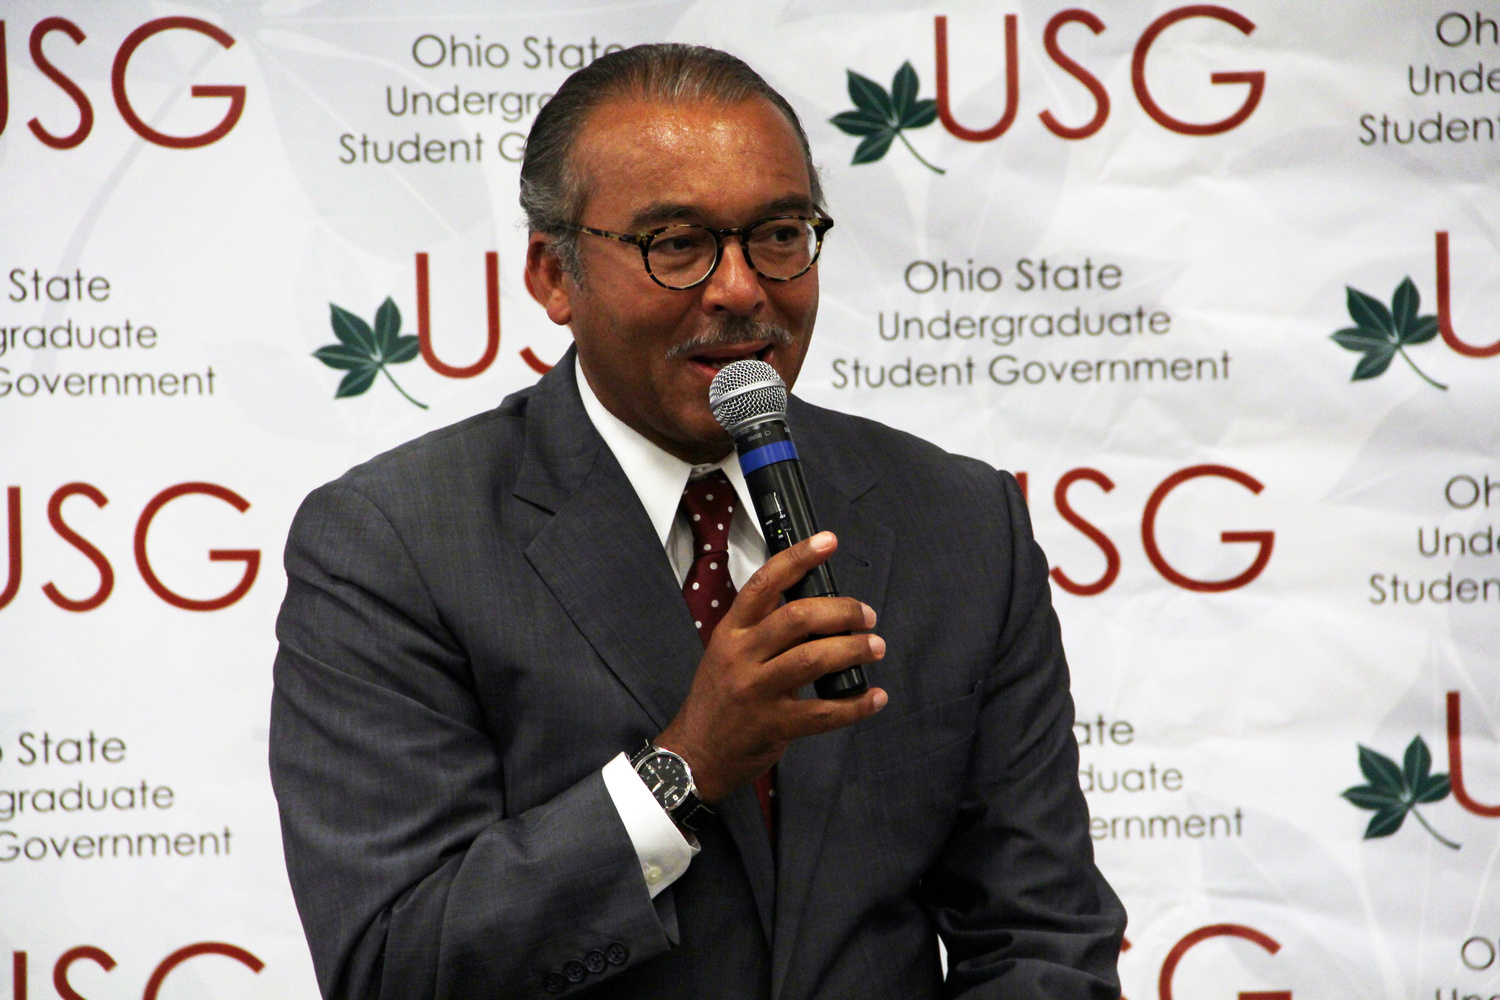 Columbus Mayor Michael Coleman speaks at a USG General Assembly meeting Oct. 1 at Ohio Union about the Columbus Education Plan. Credit: Ritika Shah / Asst. photo editor